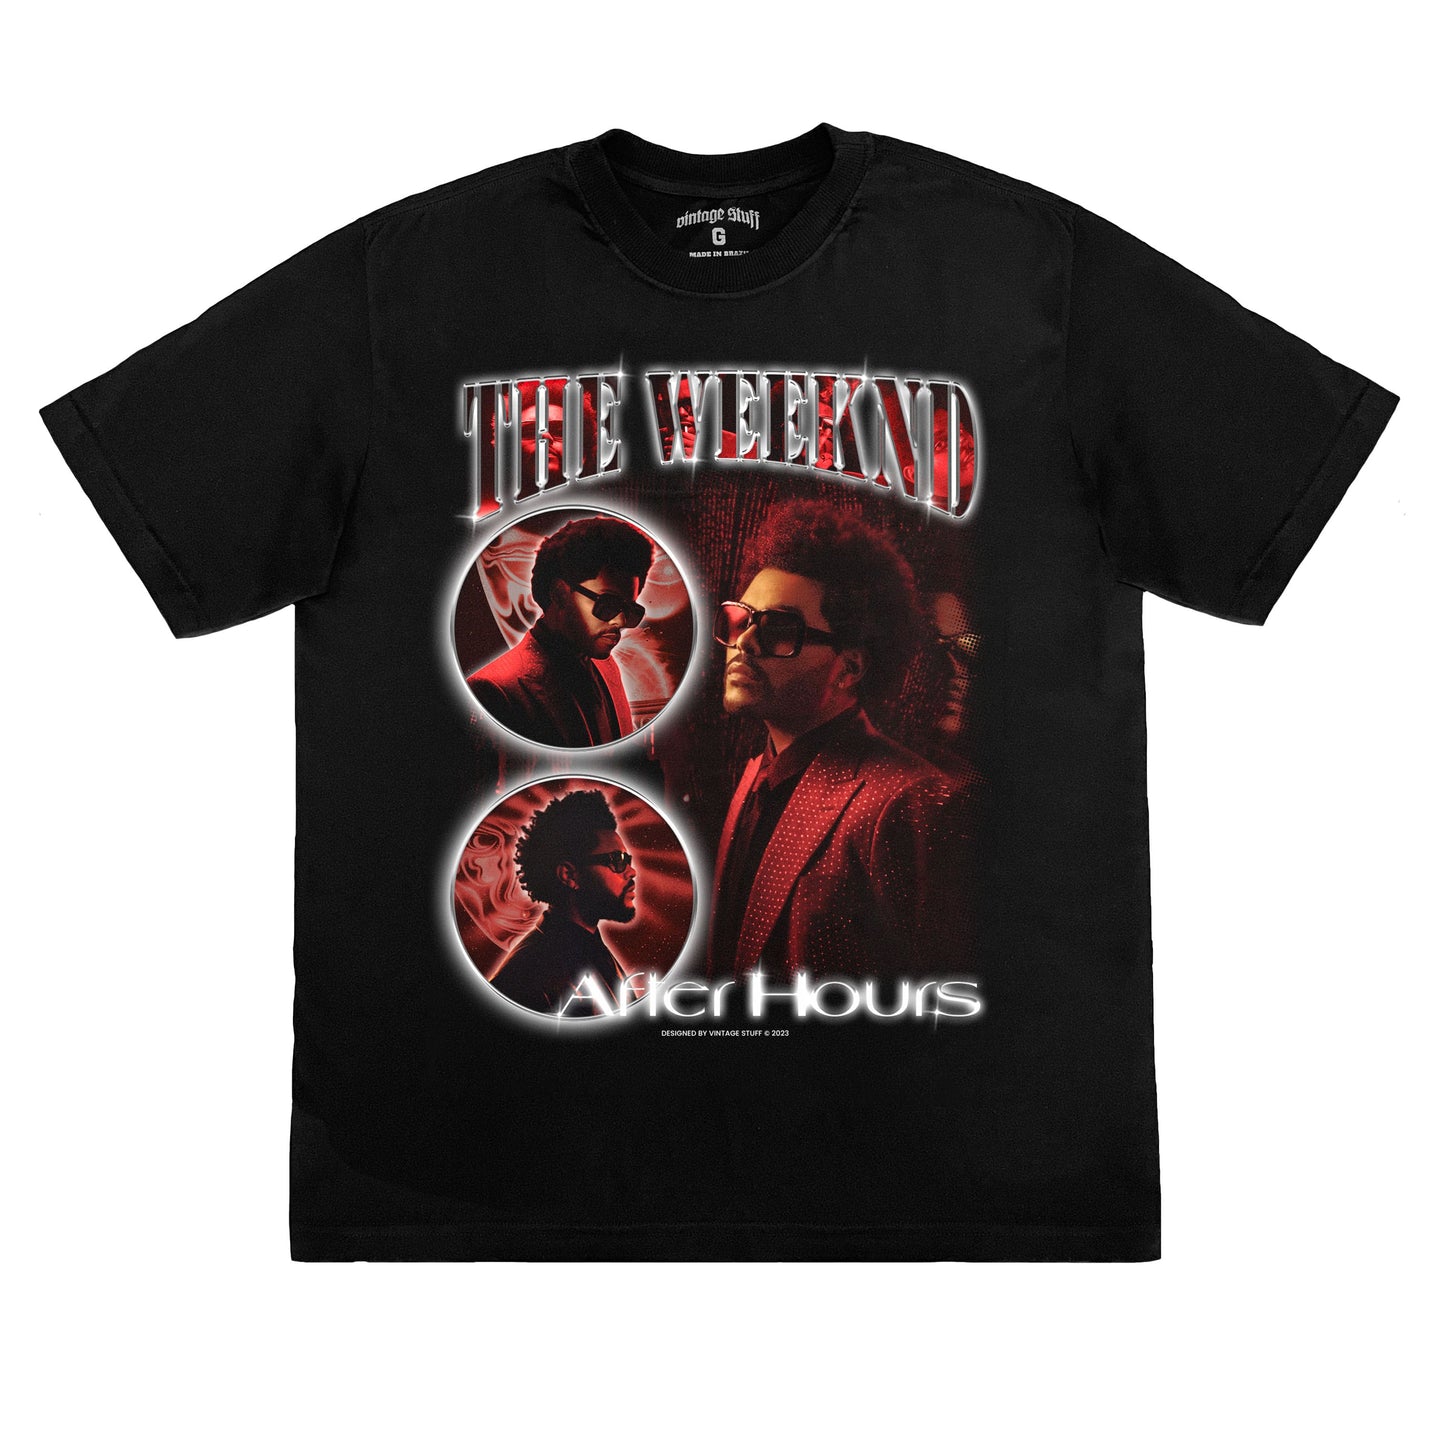 Camiseta The Weeknd "After Hours"